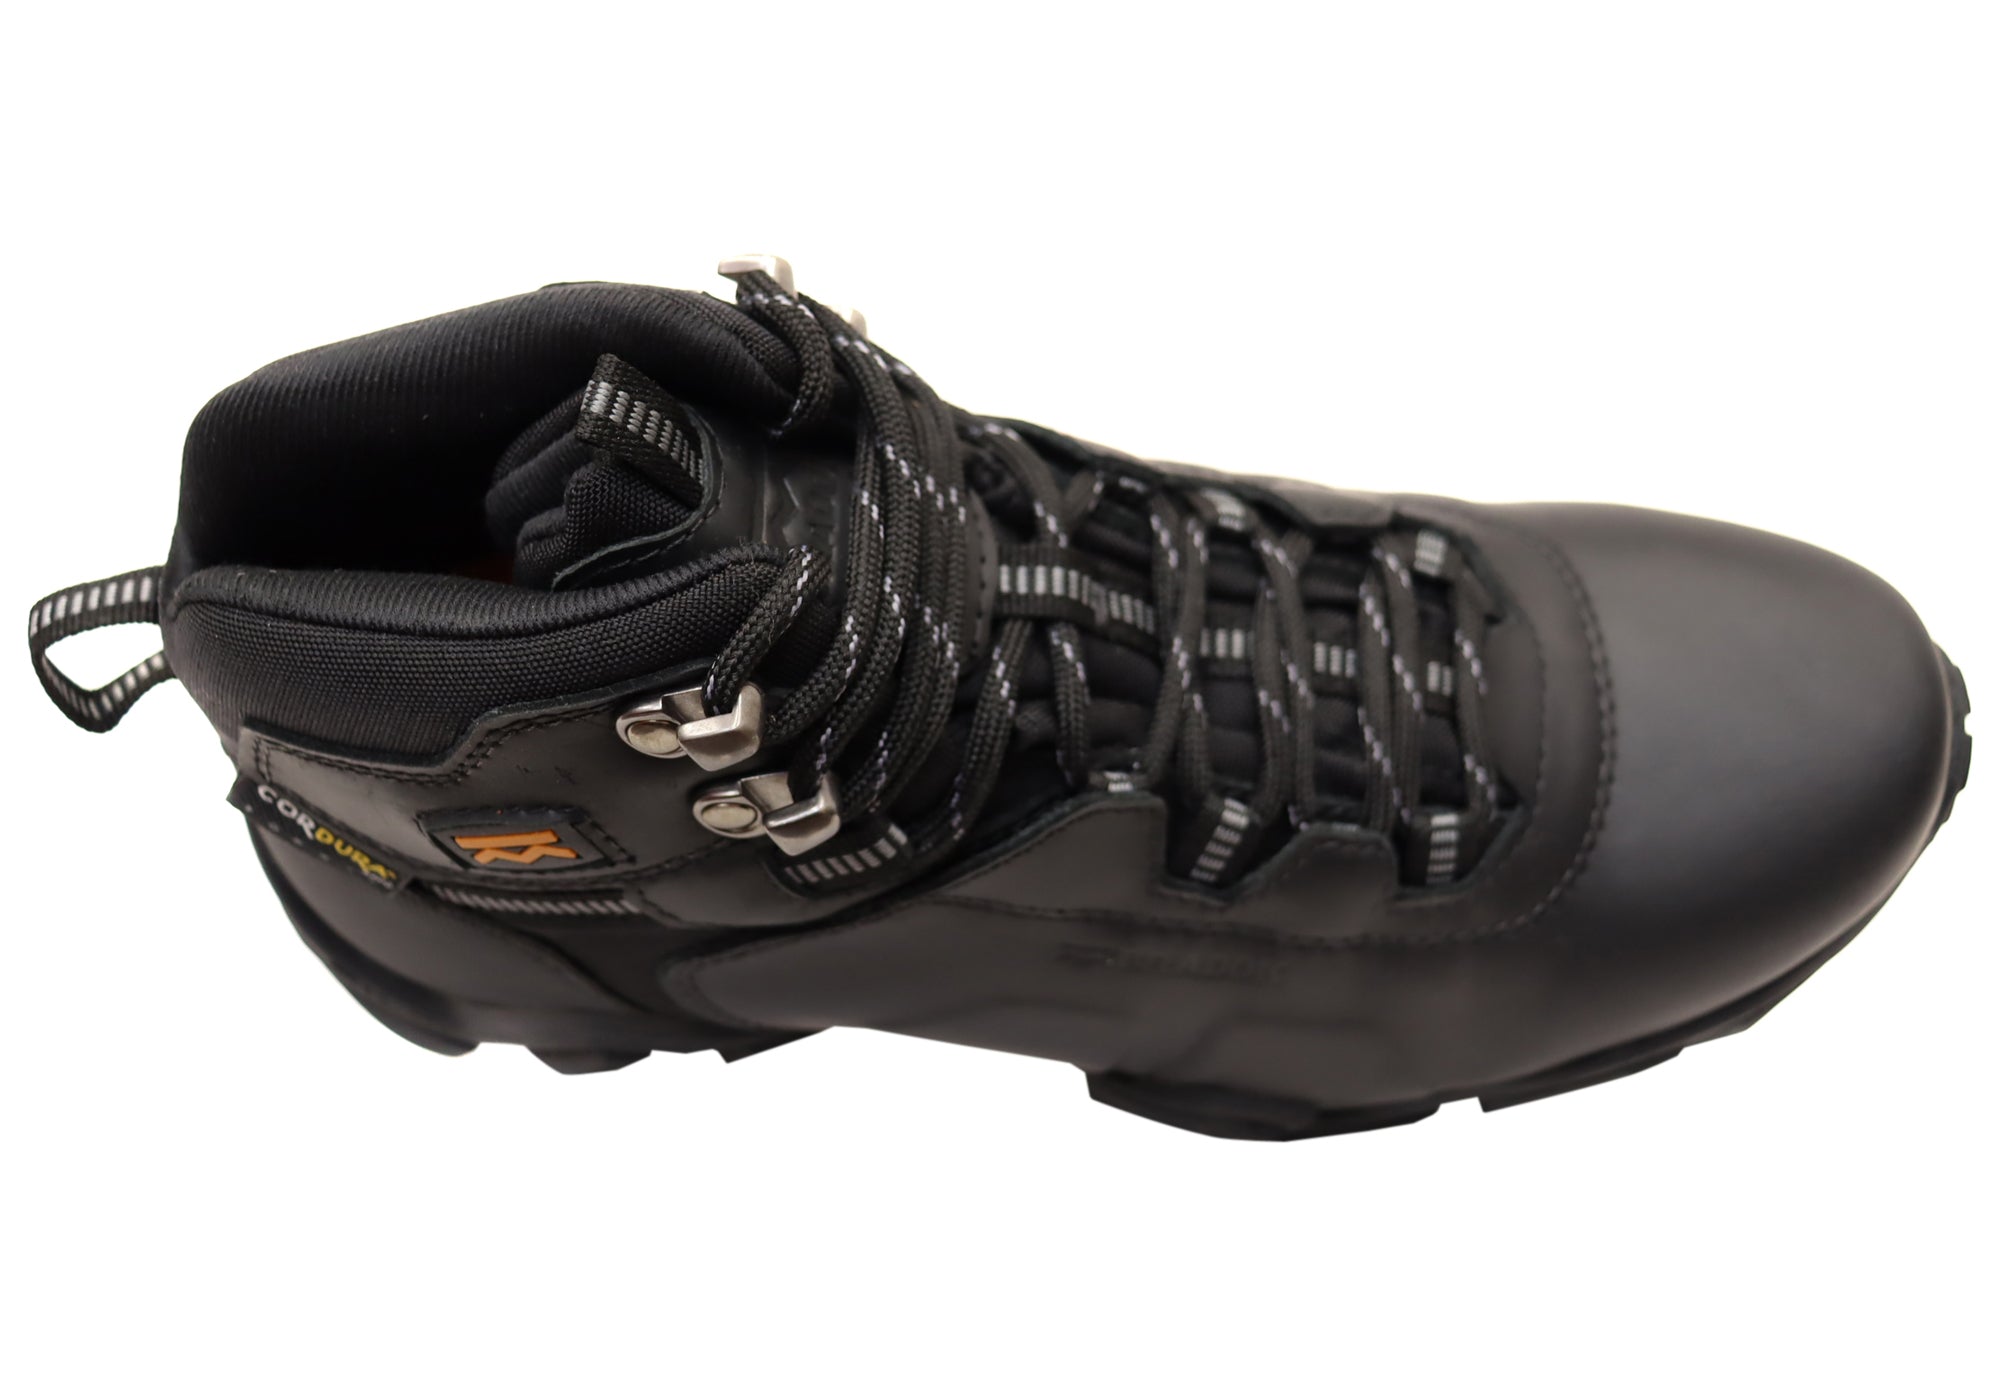 Bradok Trex Mens Comfortable Leather Hiking Boots Made In Brazil